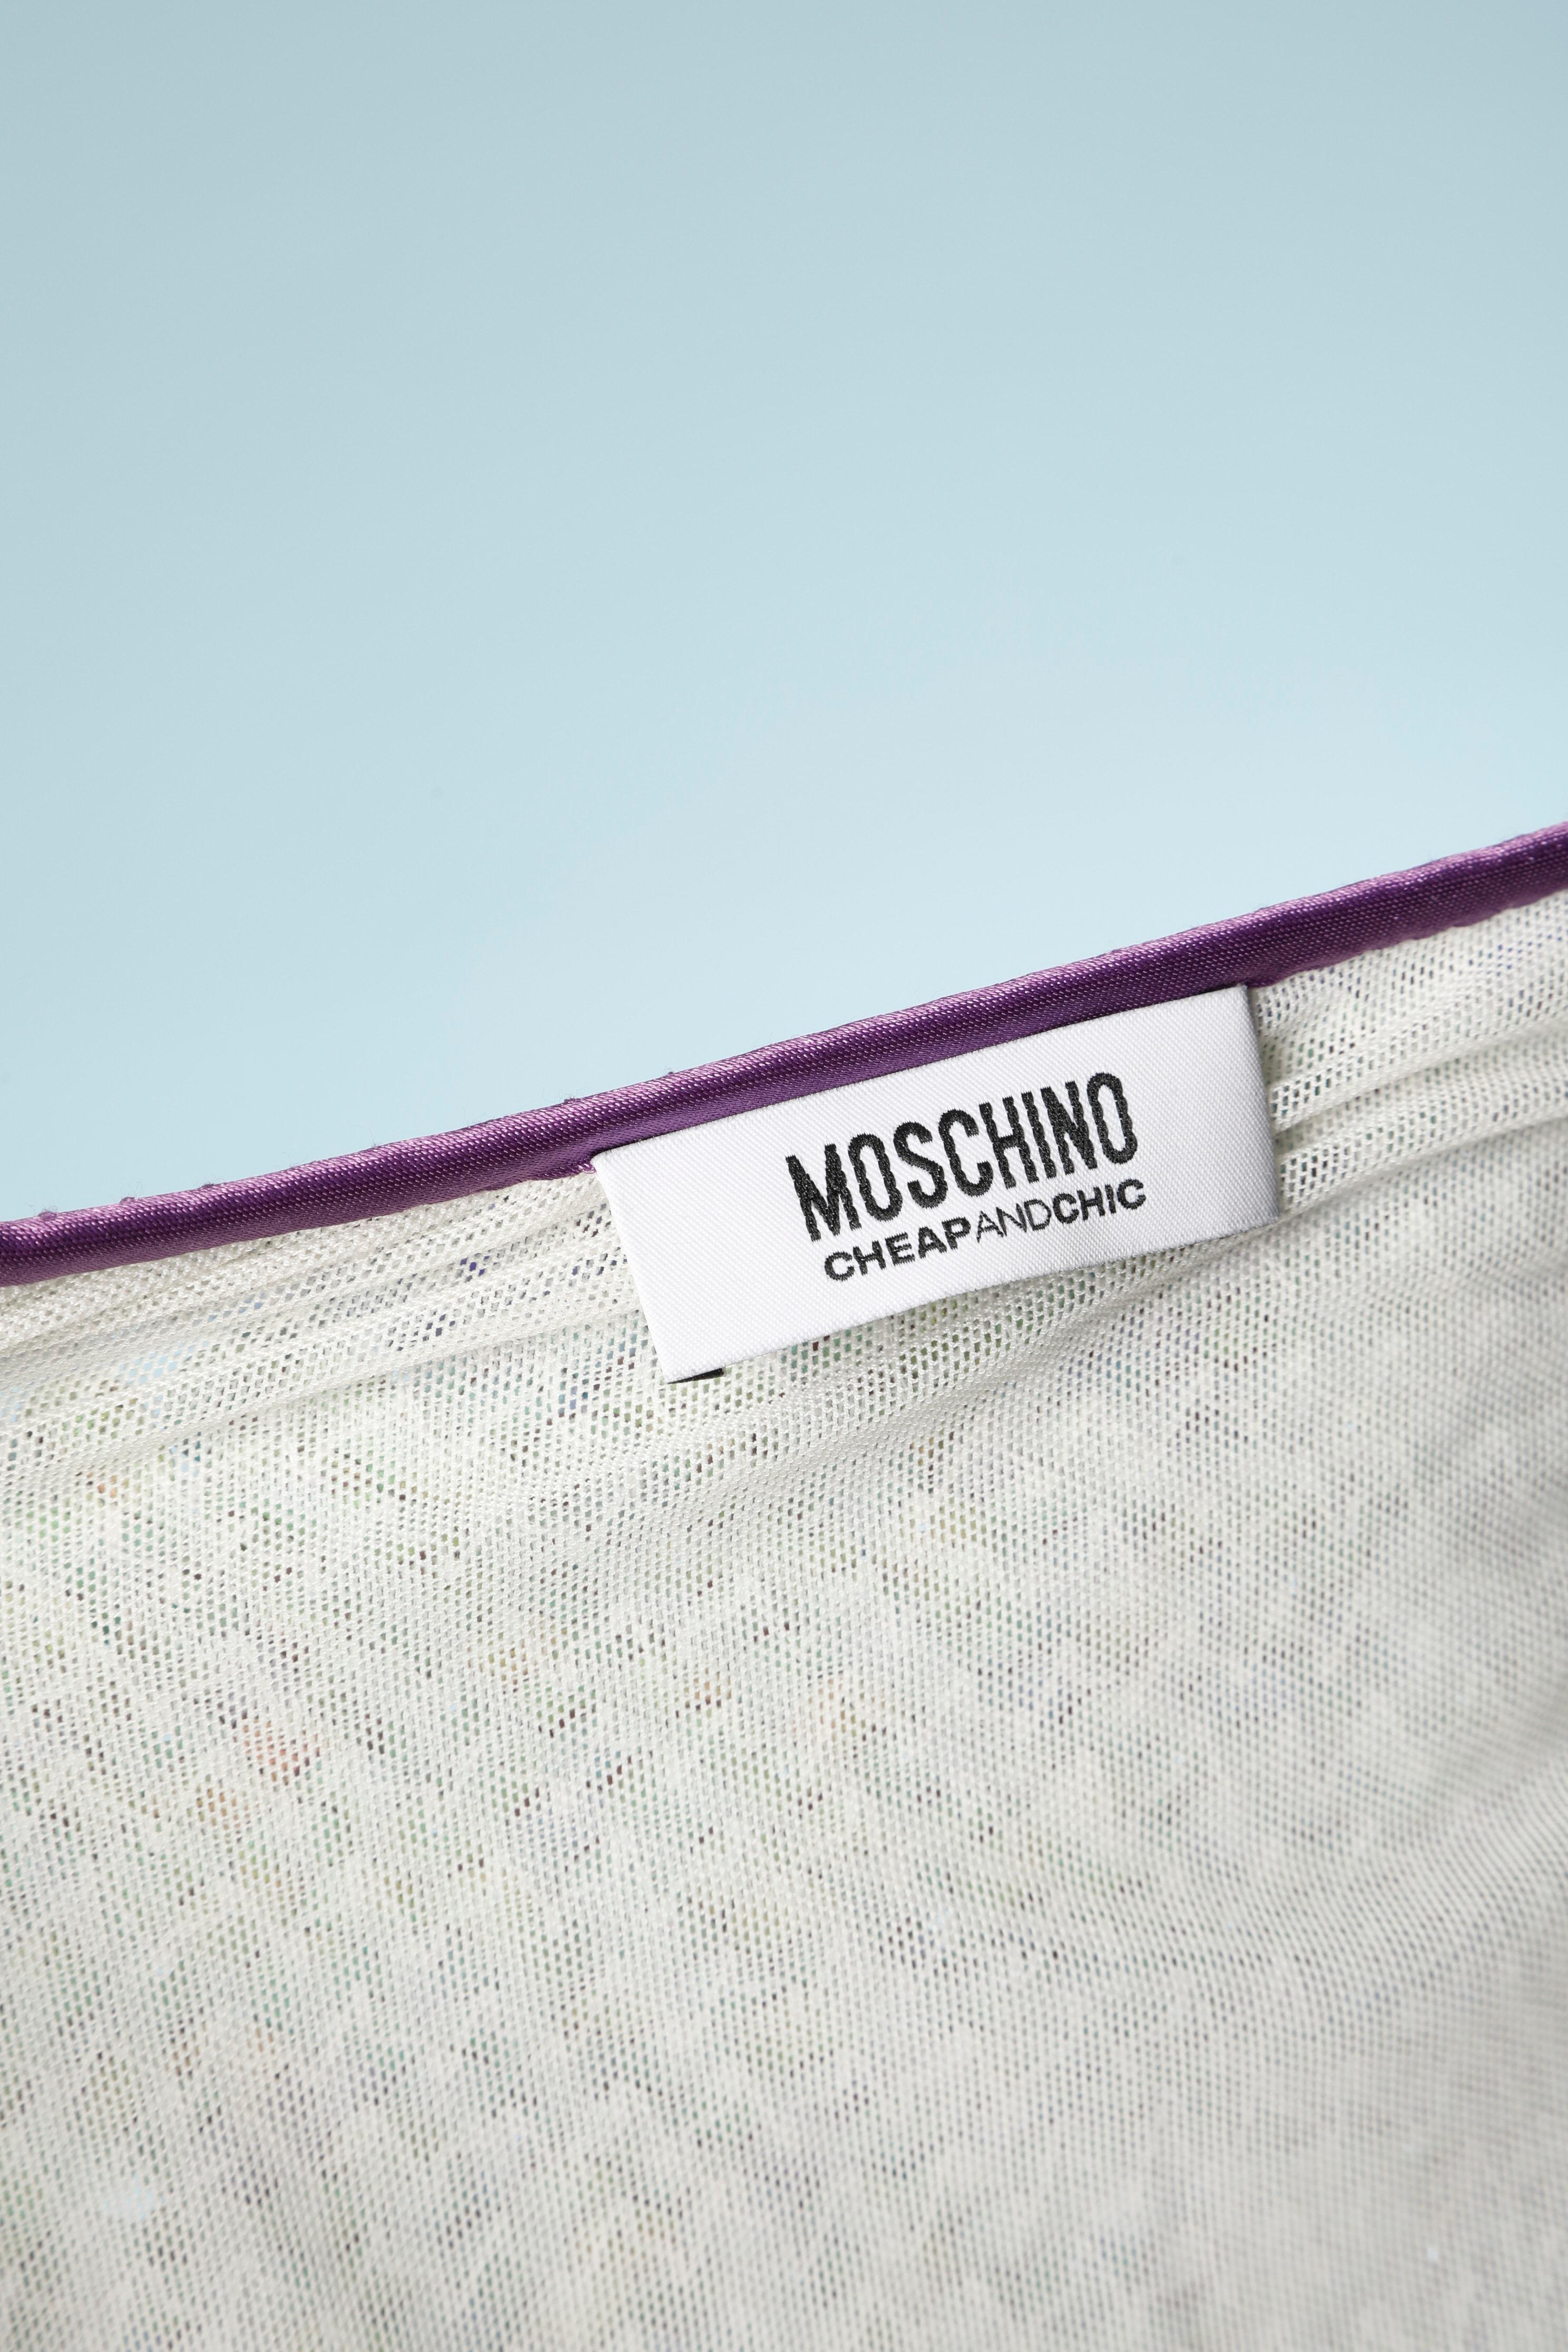 Pastel sequin iridescent cardigan Moschino Cheap & Chic  In Excellent Condition For Sale In Saint-Ouen-Sur-Seine, FR